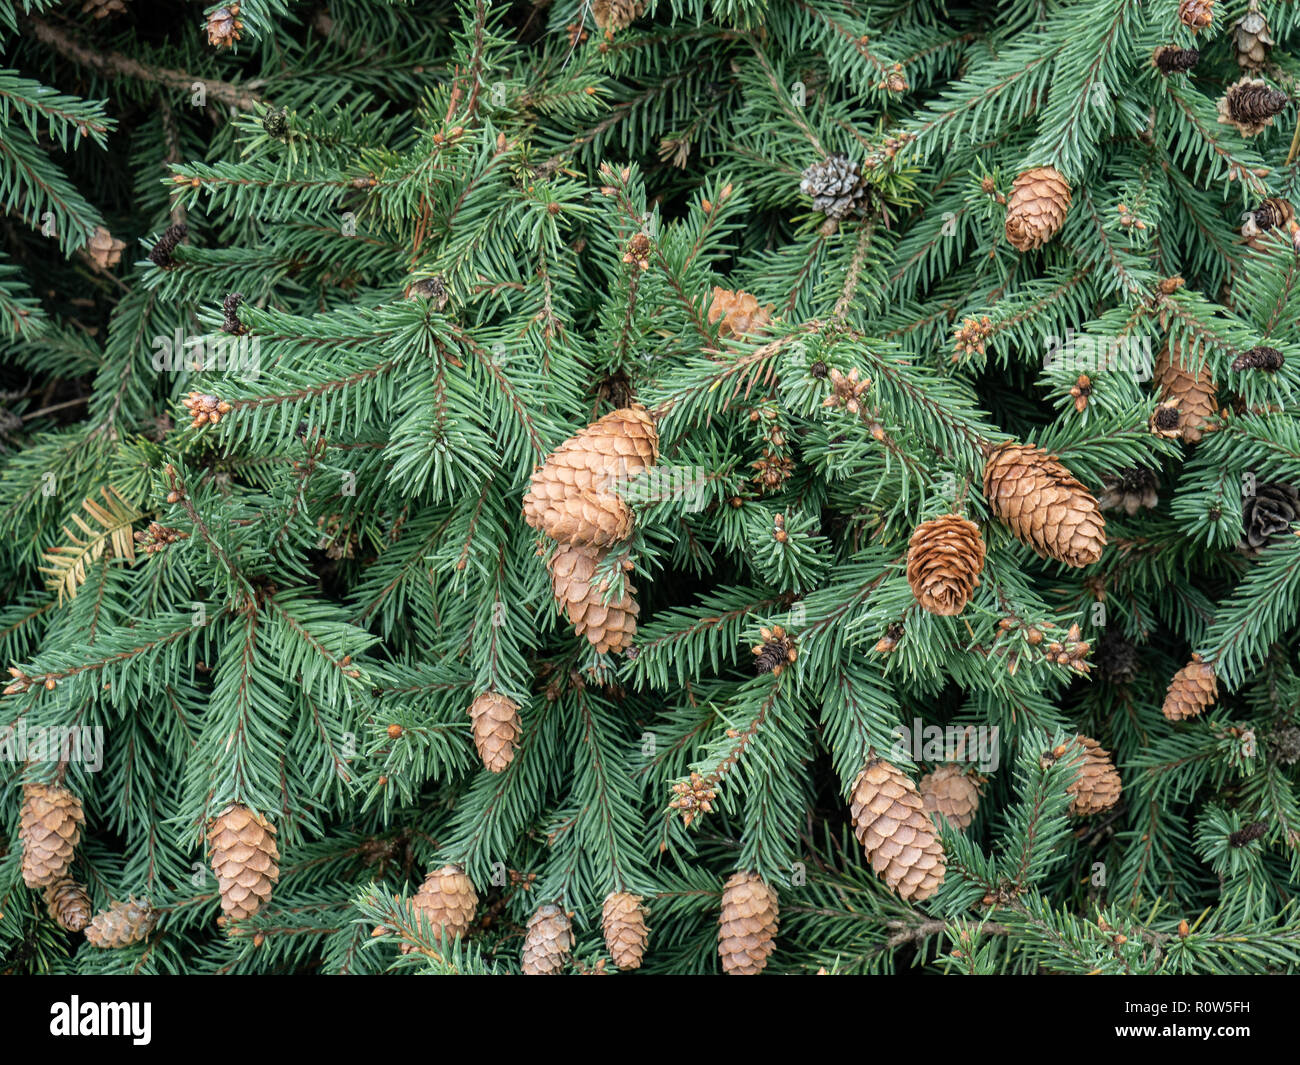 A close up of the foliage and cones of Picea abies Pusch Stock Photo